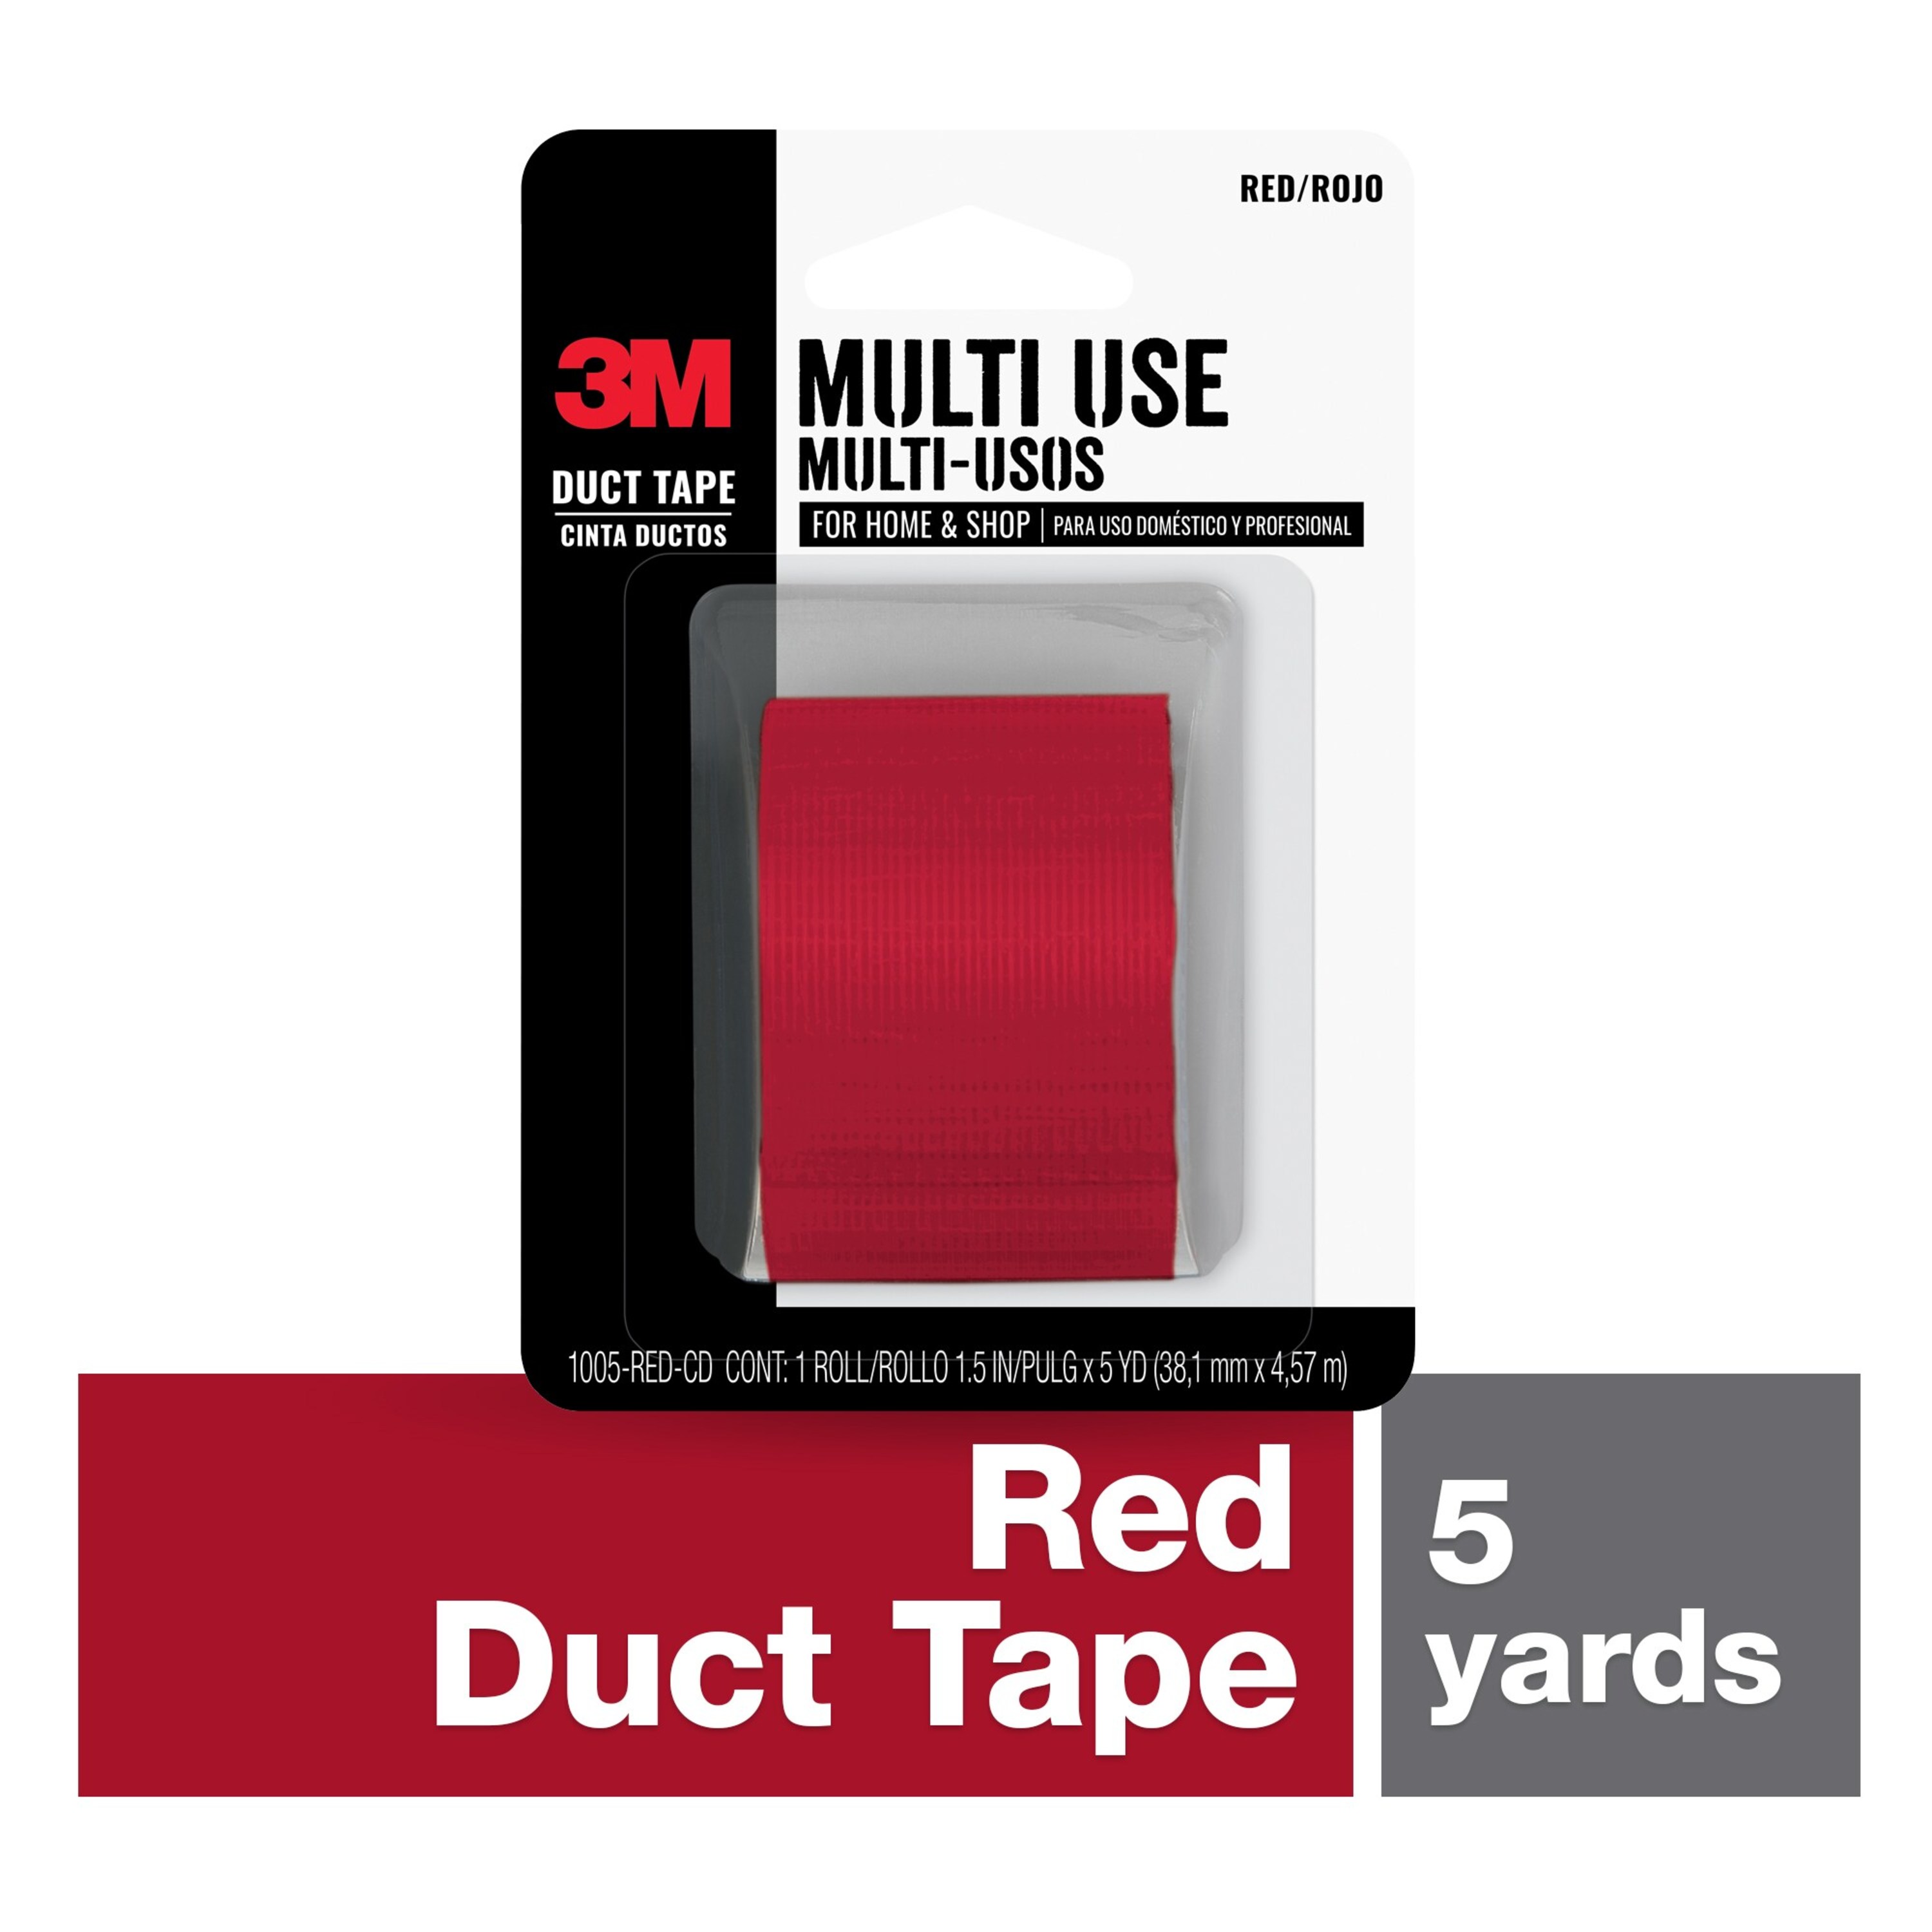 3M™ Red Duct Tape, 1005-RED-CD, 1.5 in x 5 yd, 12/cs